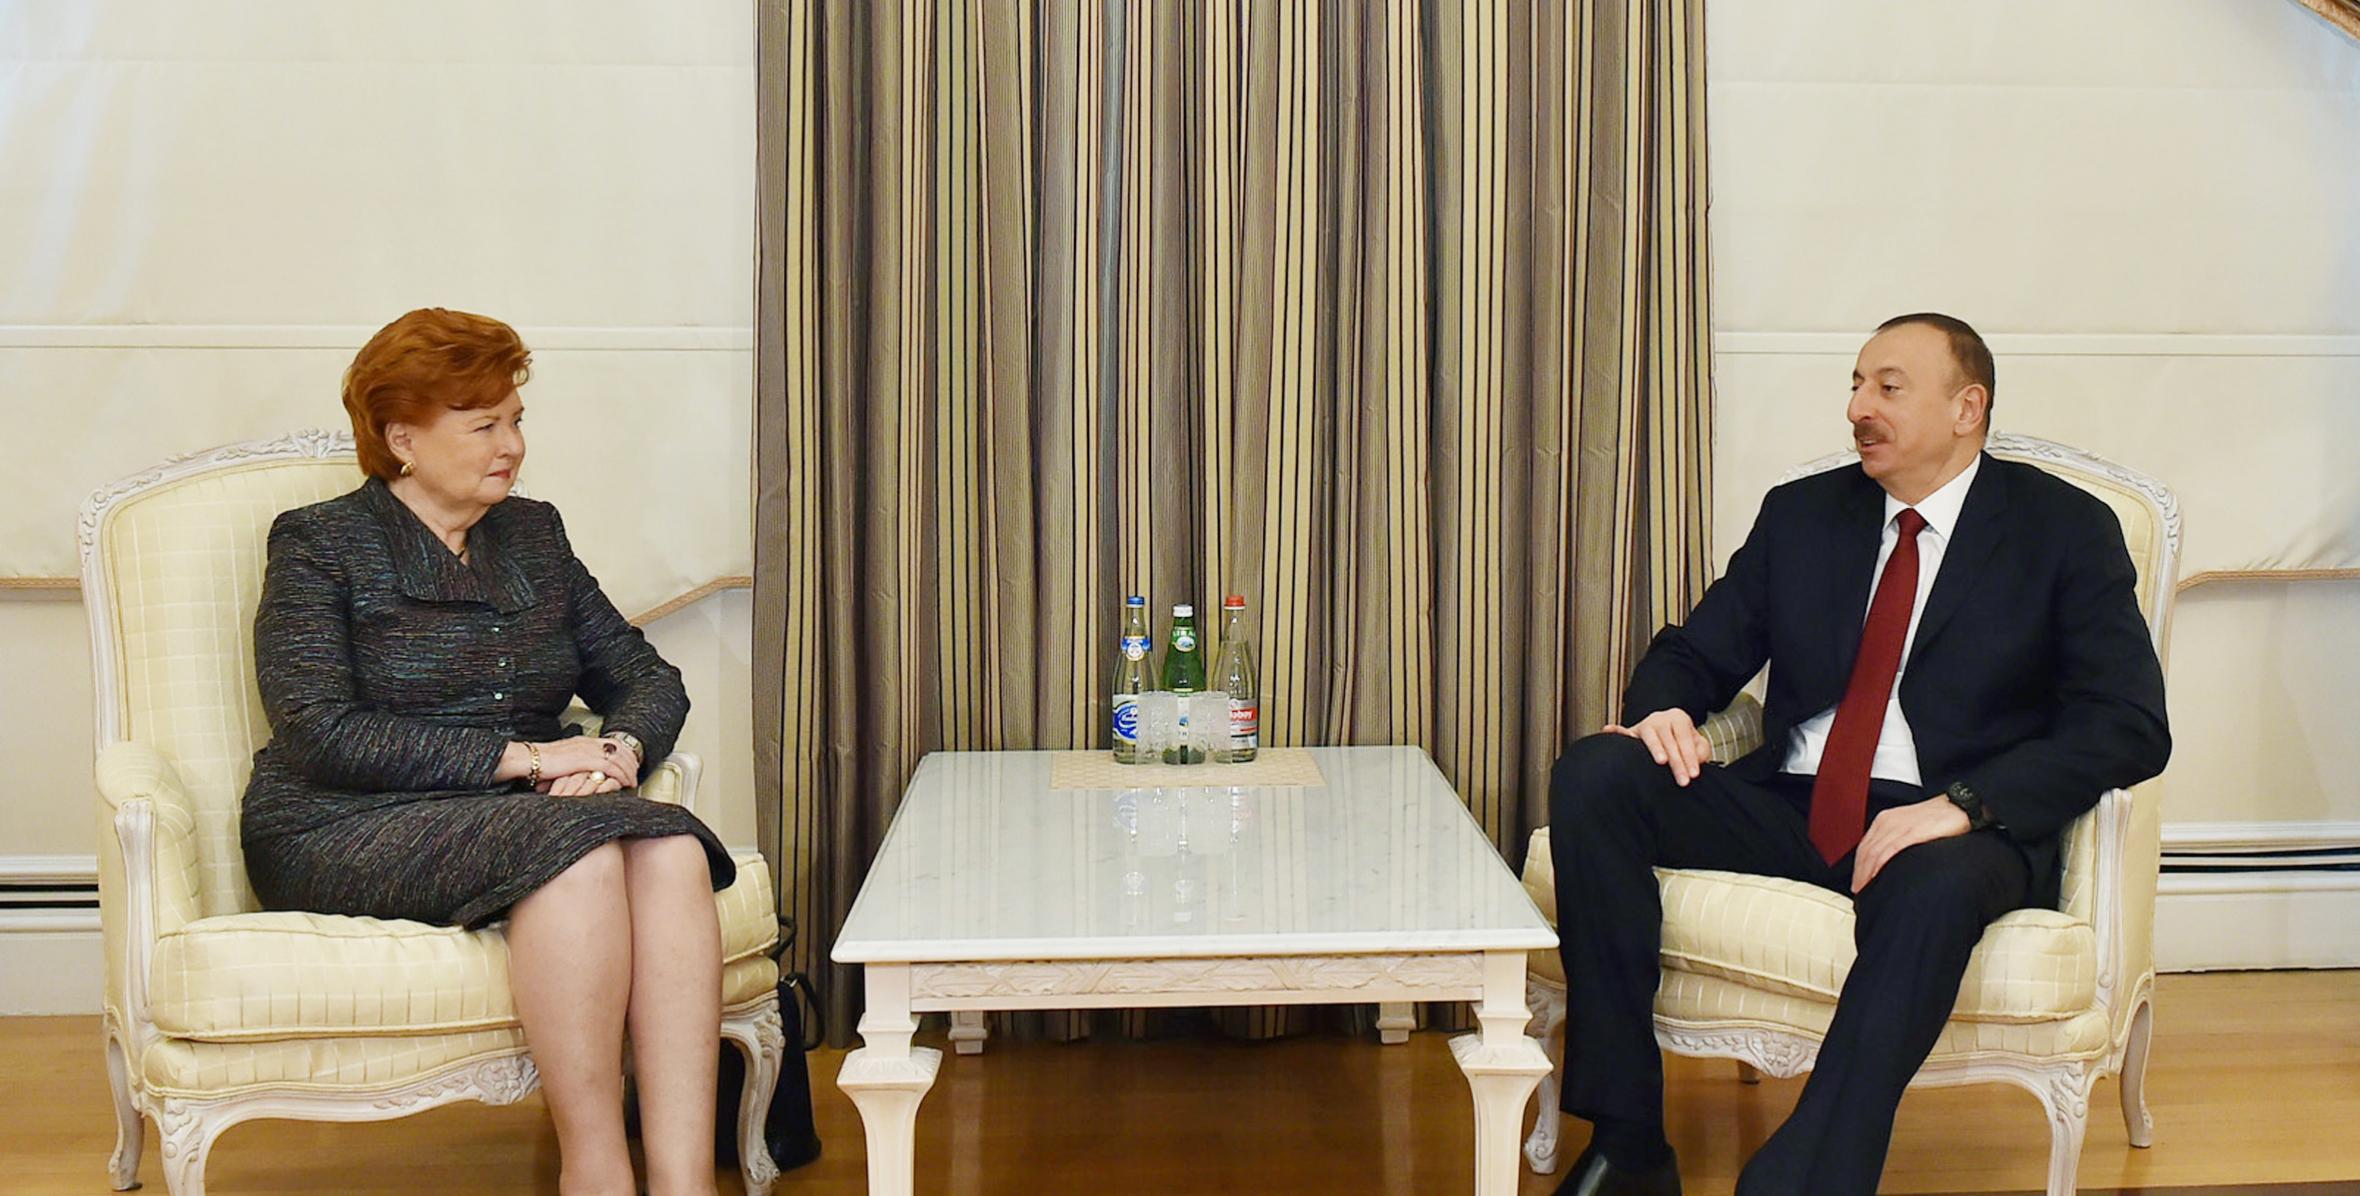 Ilham Aliyev received the former President of Latvia and the director of the Bibliotheca Alexandrina